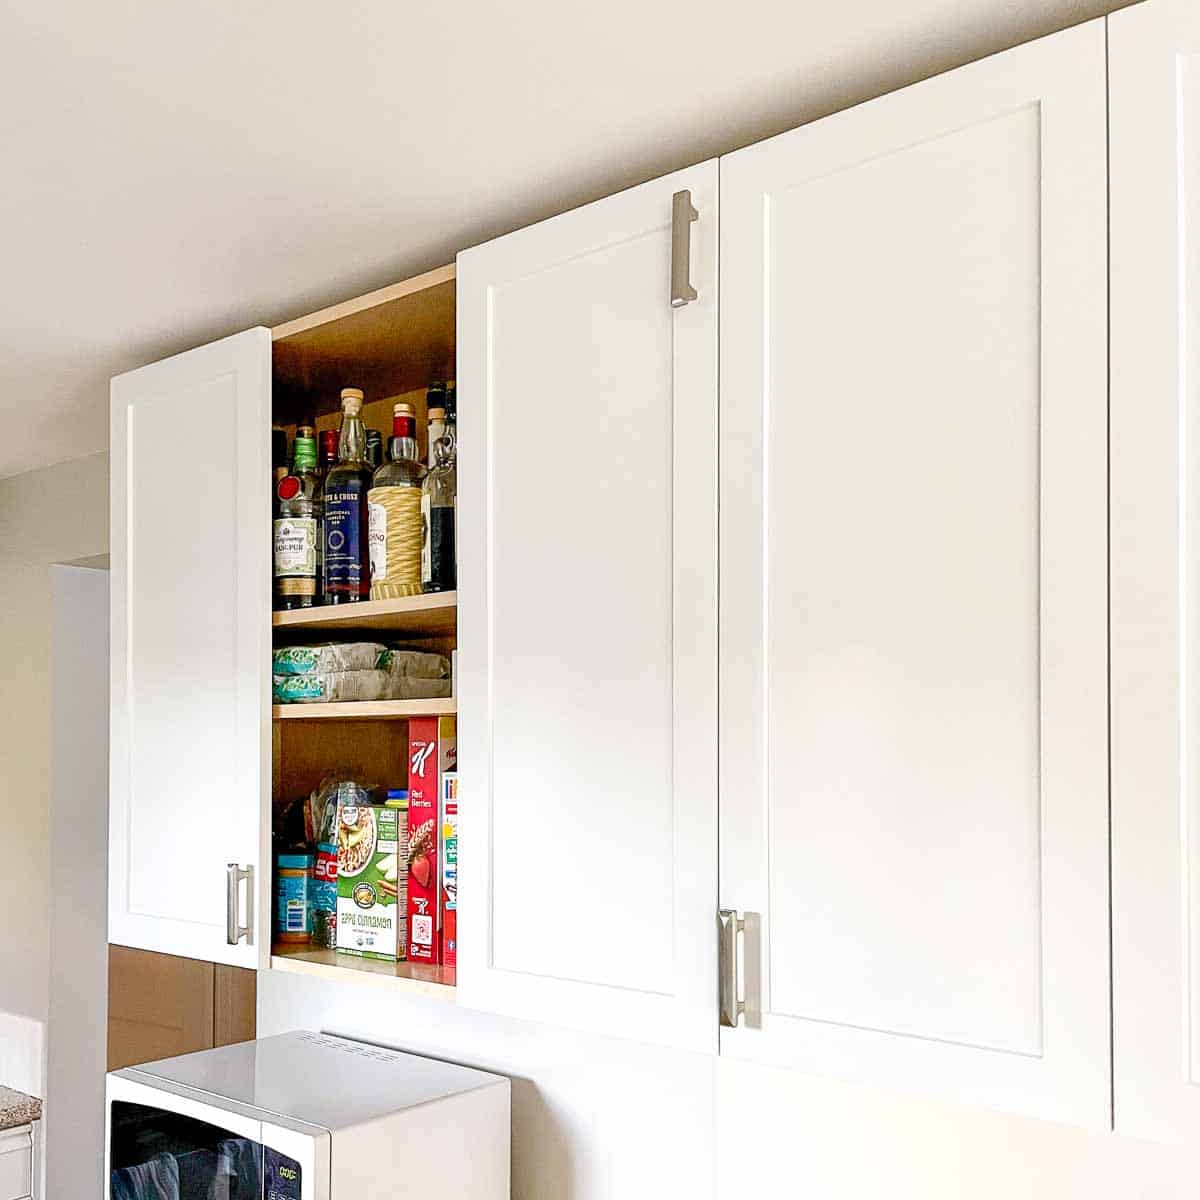 white shaker style cabinet doors with handle installed the wrong way